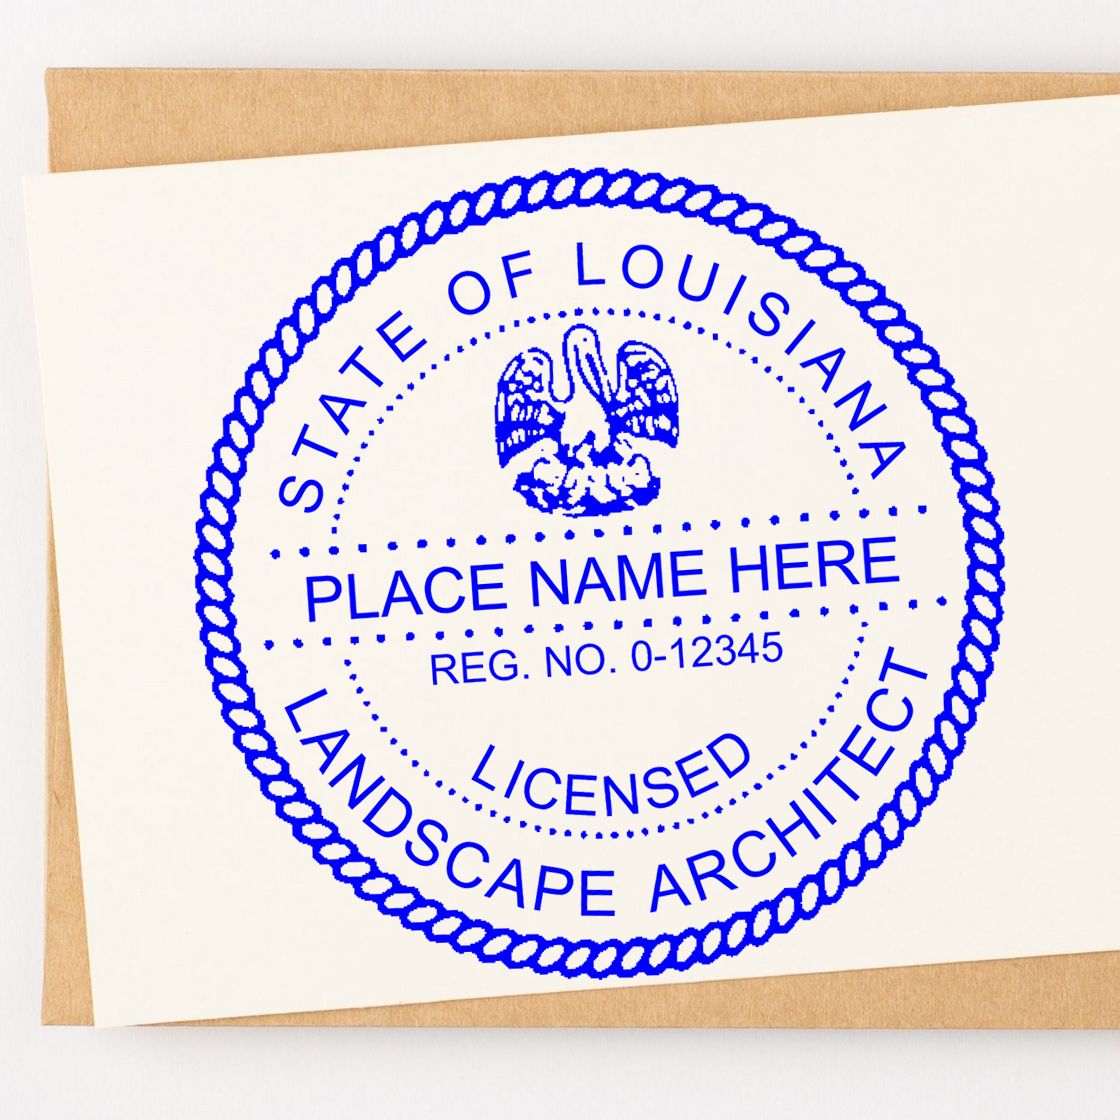 Louisiana Landscape Architectural Seal Stamp in use photo showing a stamped imprint of the Louisiana Landscape Architectural Seal Stamp